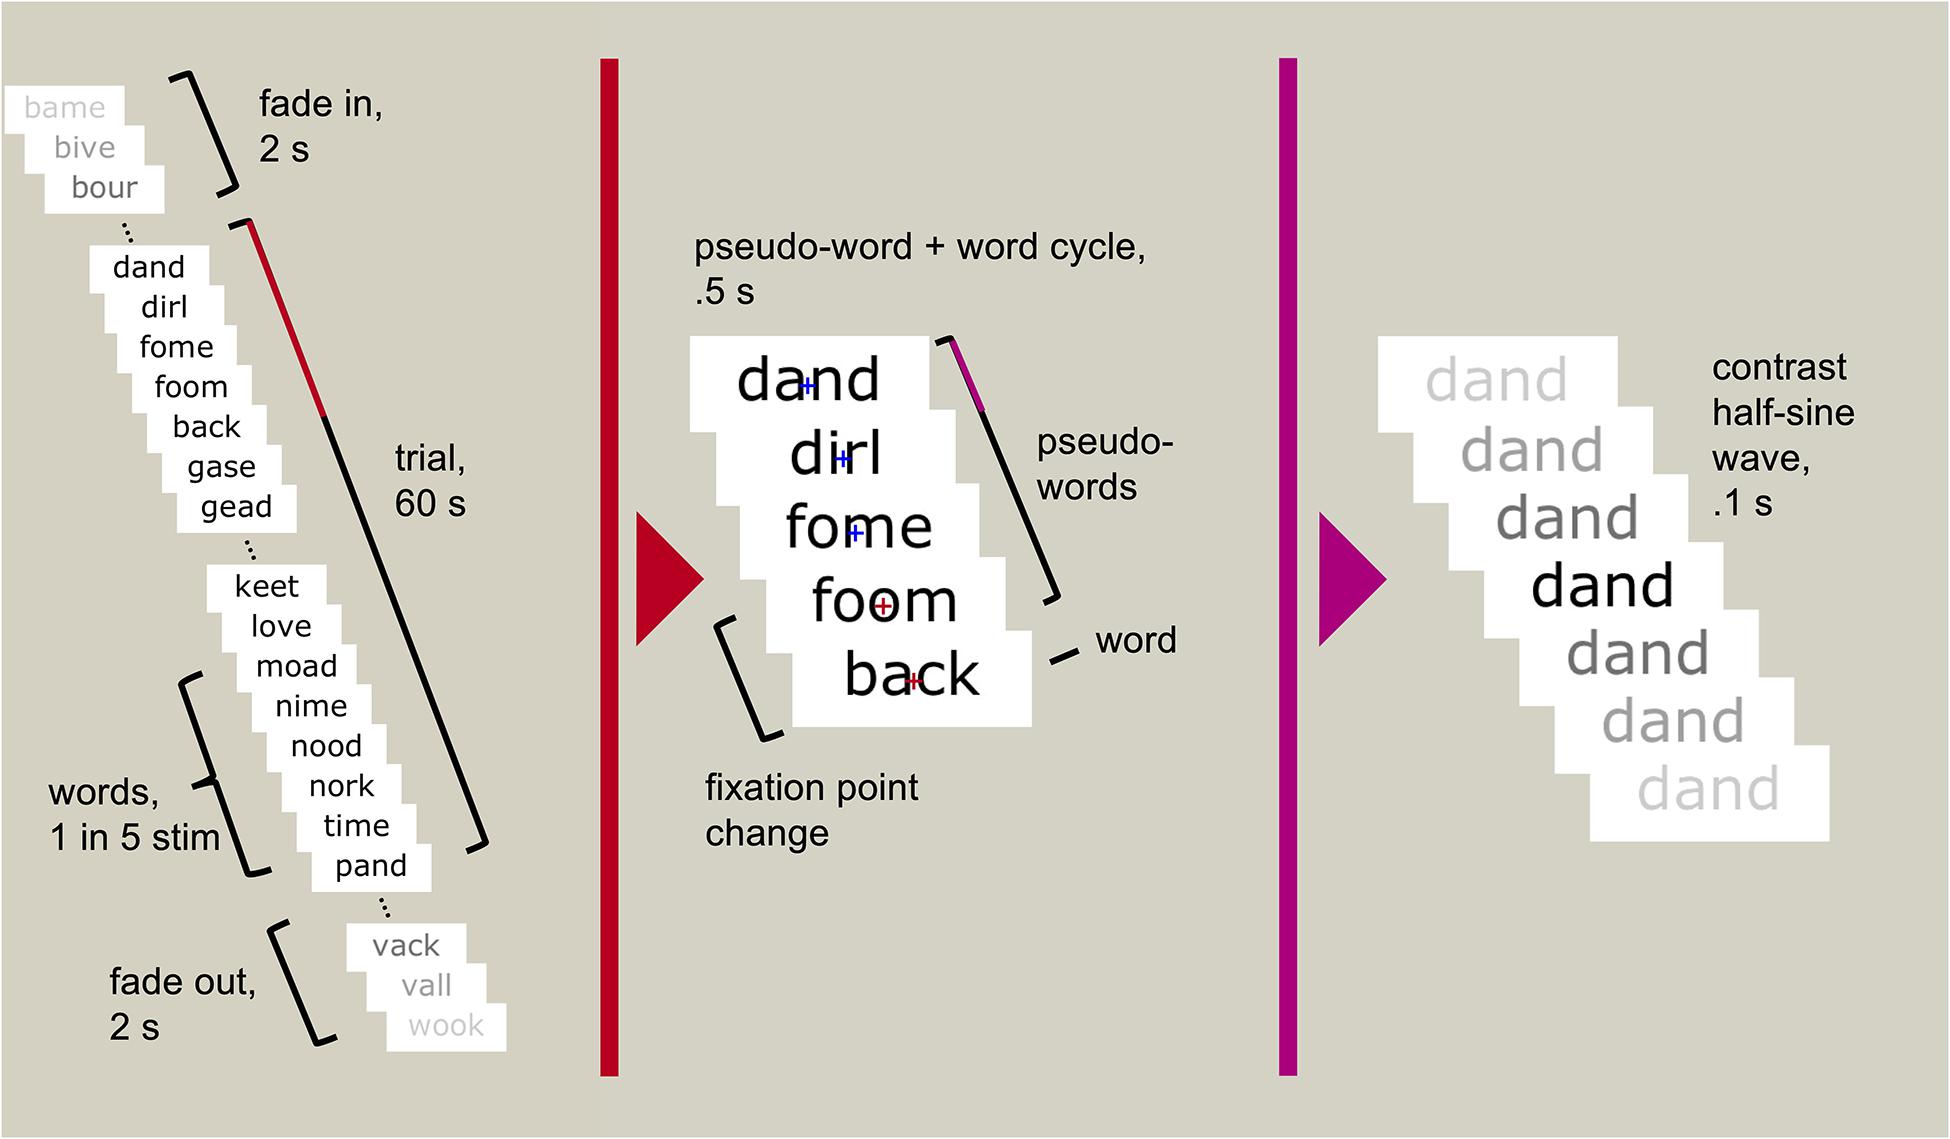 Words Flanked and Meet are semantically related or have opposite